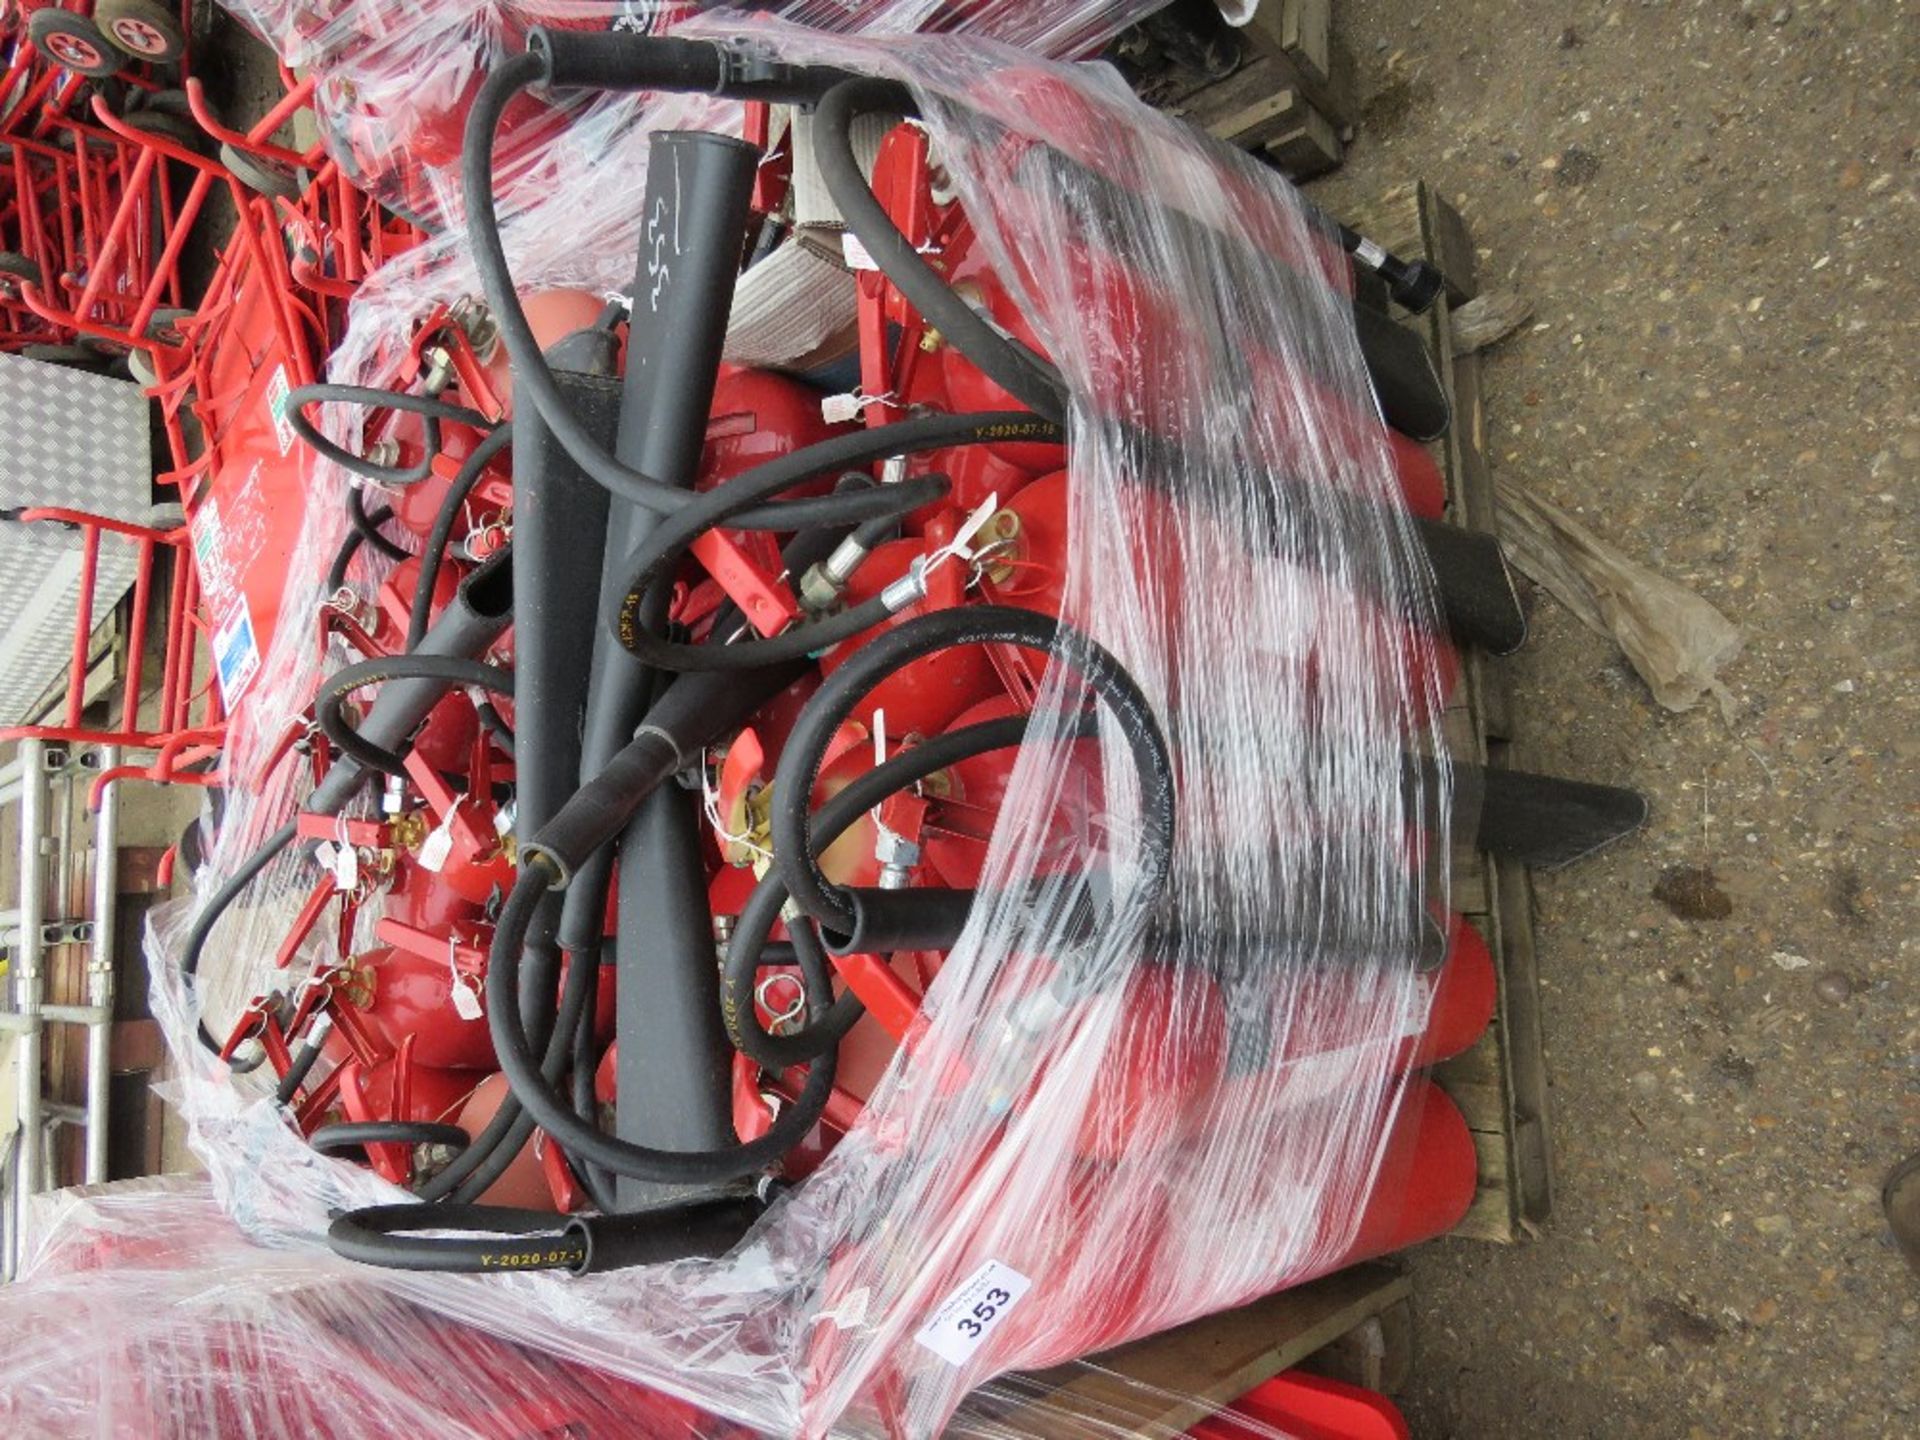 PALLET OF ASSORTED FIRE EXTINGUISHERS, MAINLY CO2 TYPE. SOURCED FROM LONDON OFFICE BLOCK. REQUIRE CE - Image 2 of 3